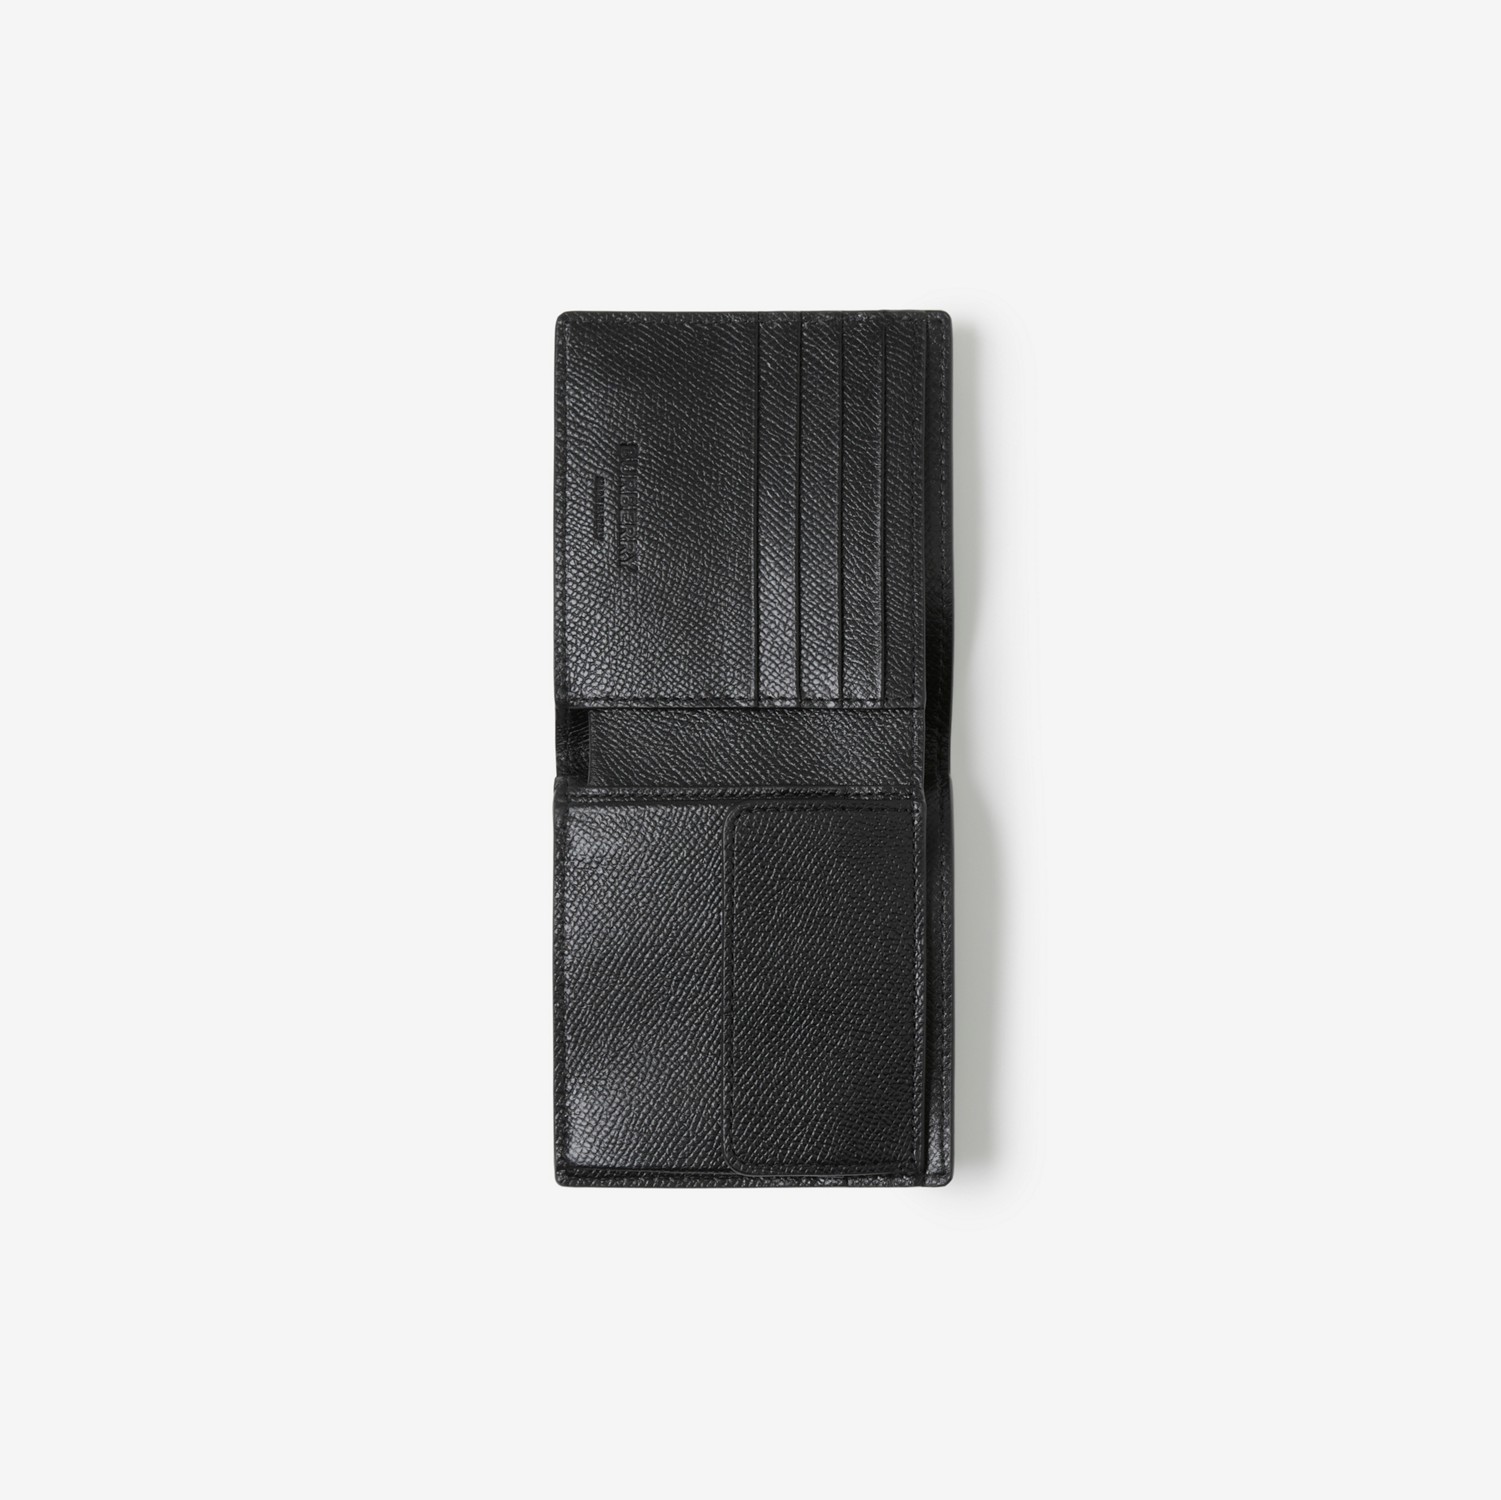 Grainy Leather TB Bifold Coin Wallet in Black - Men | Burberry® Official